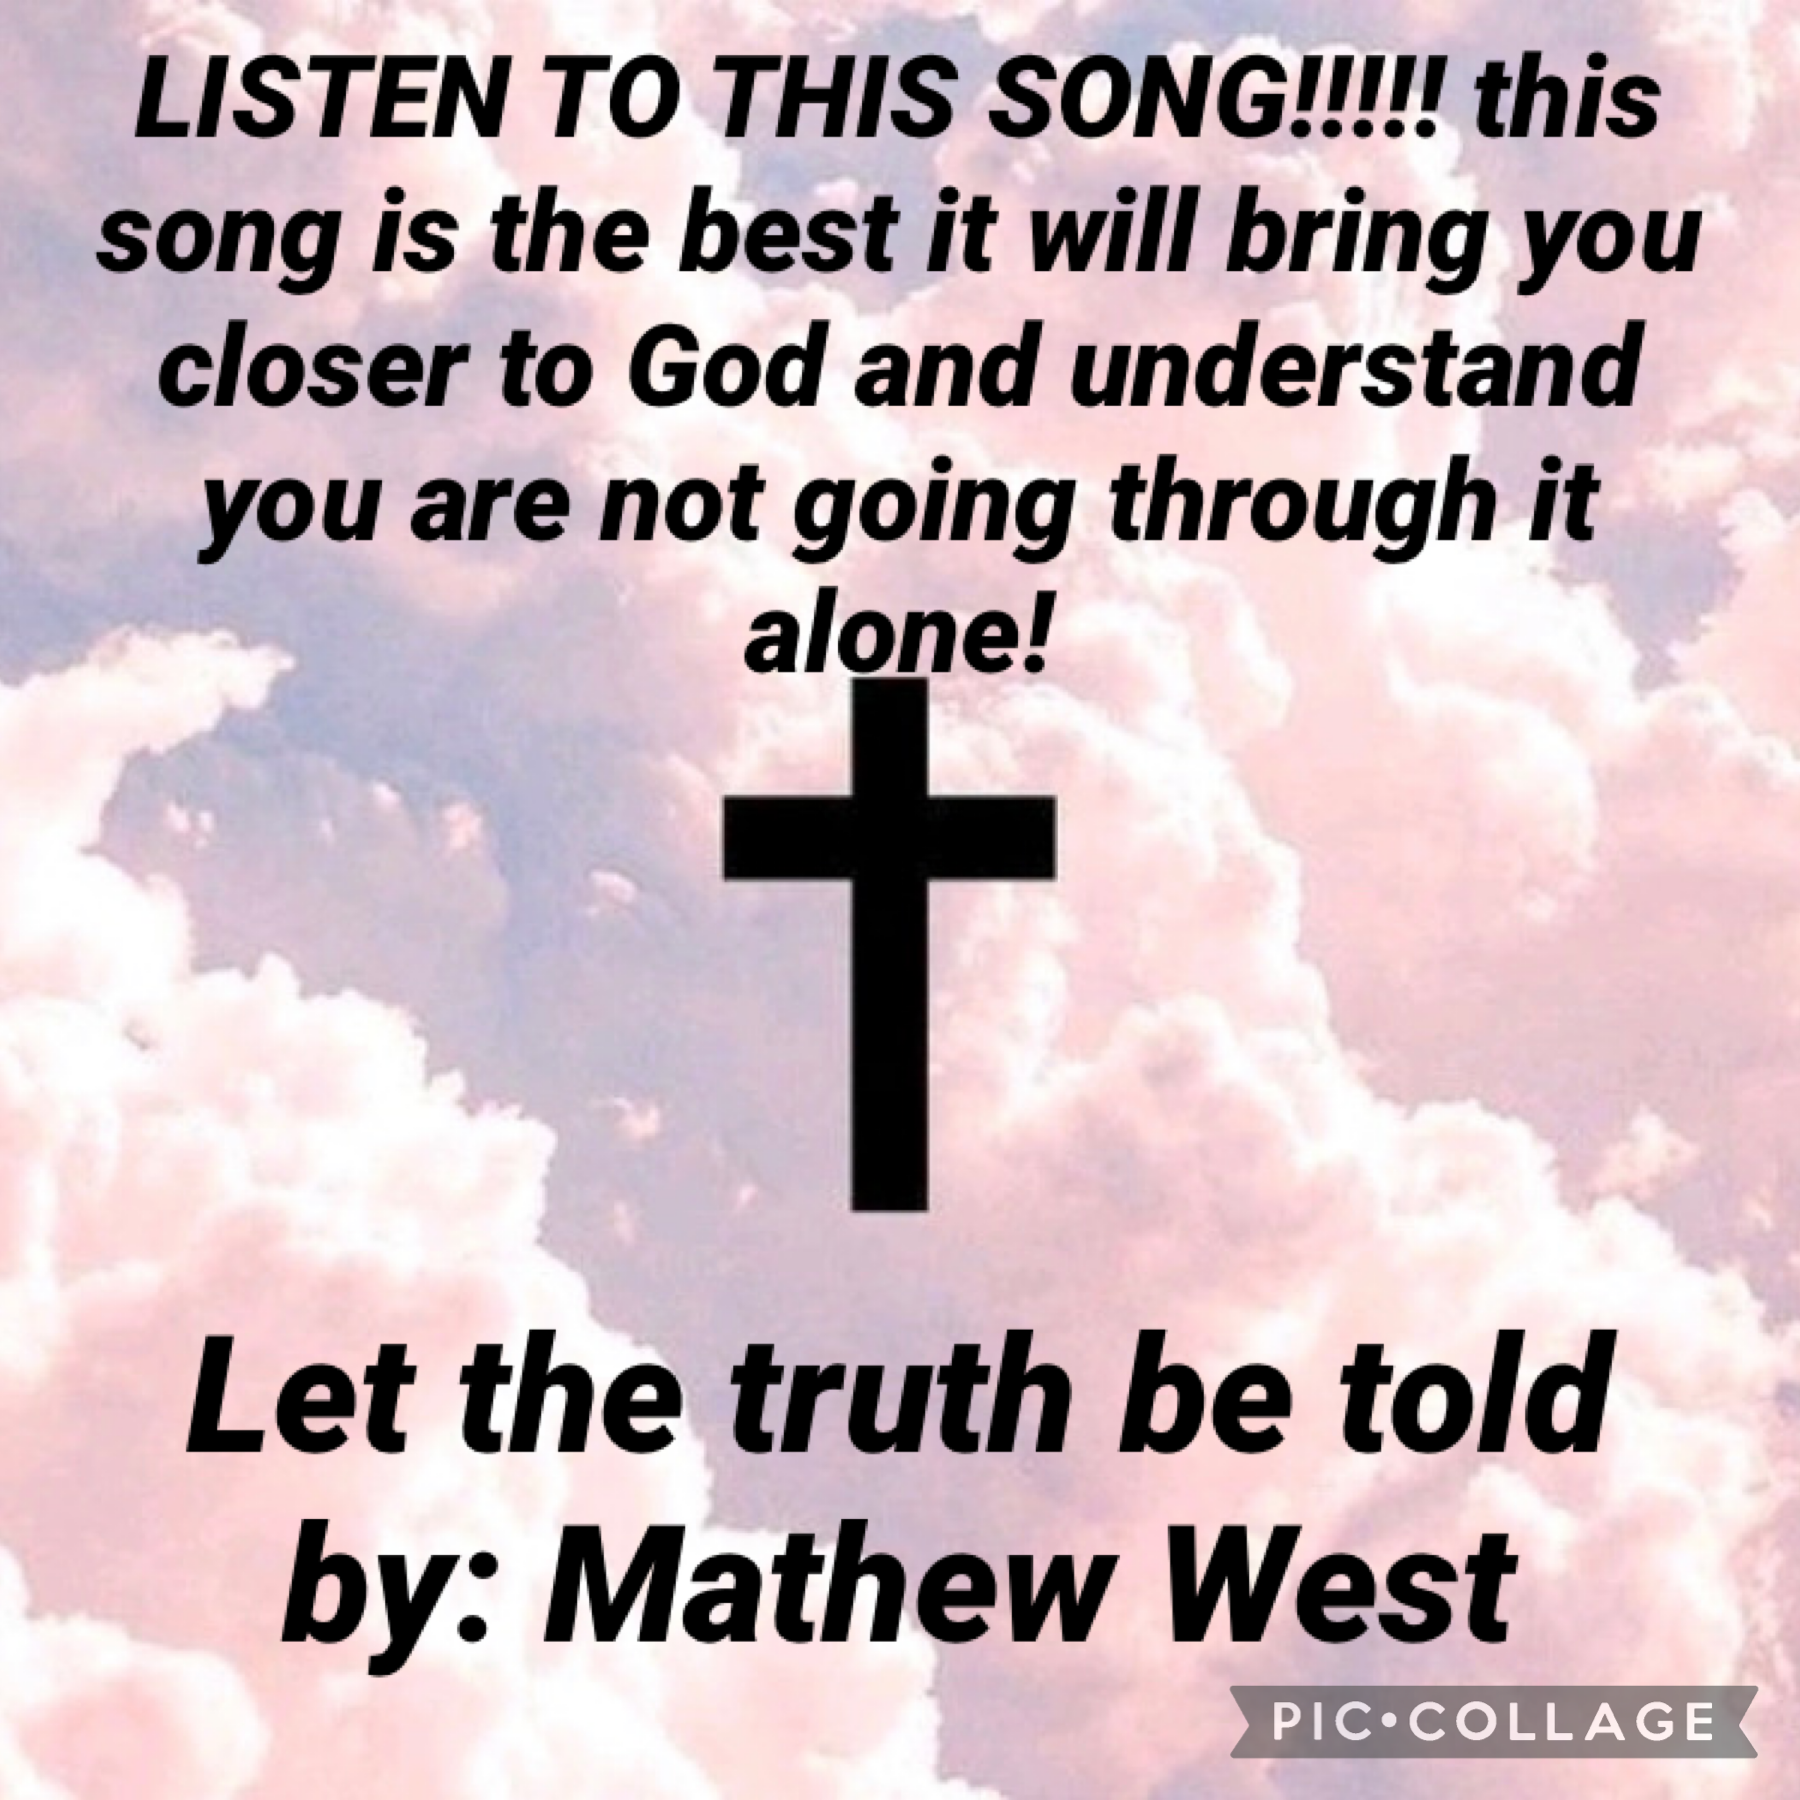 tap!
Let the truth be told 
by: Mathew West